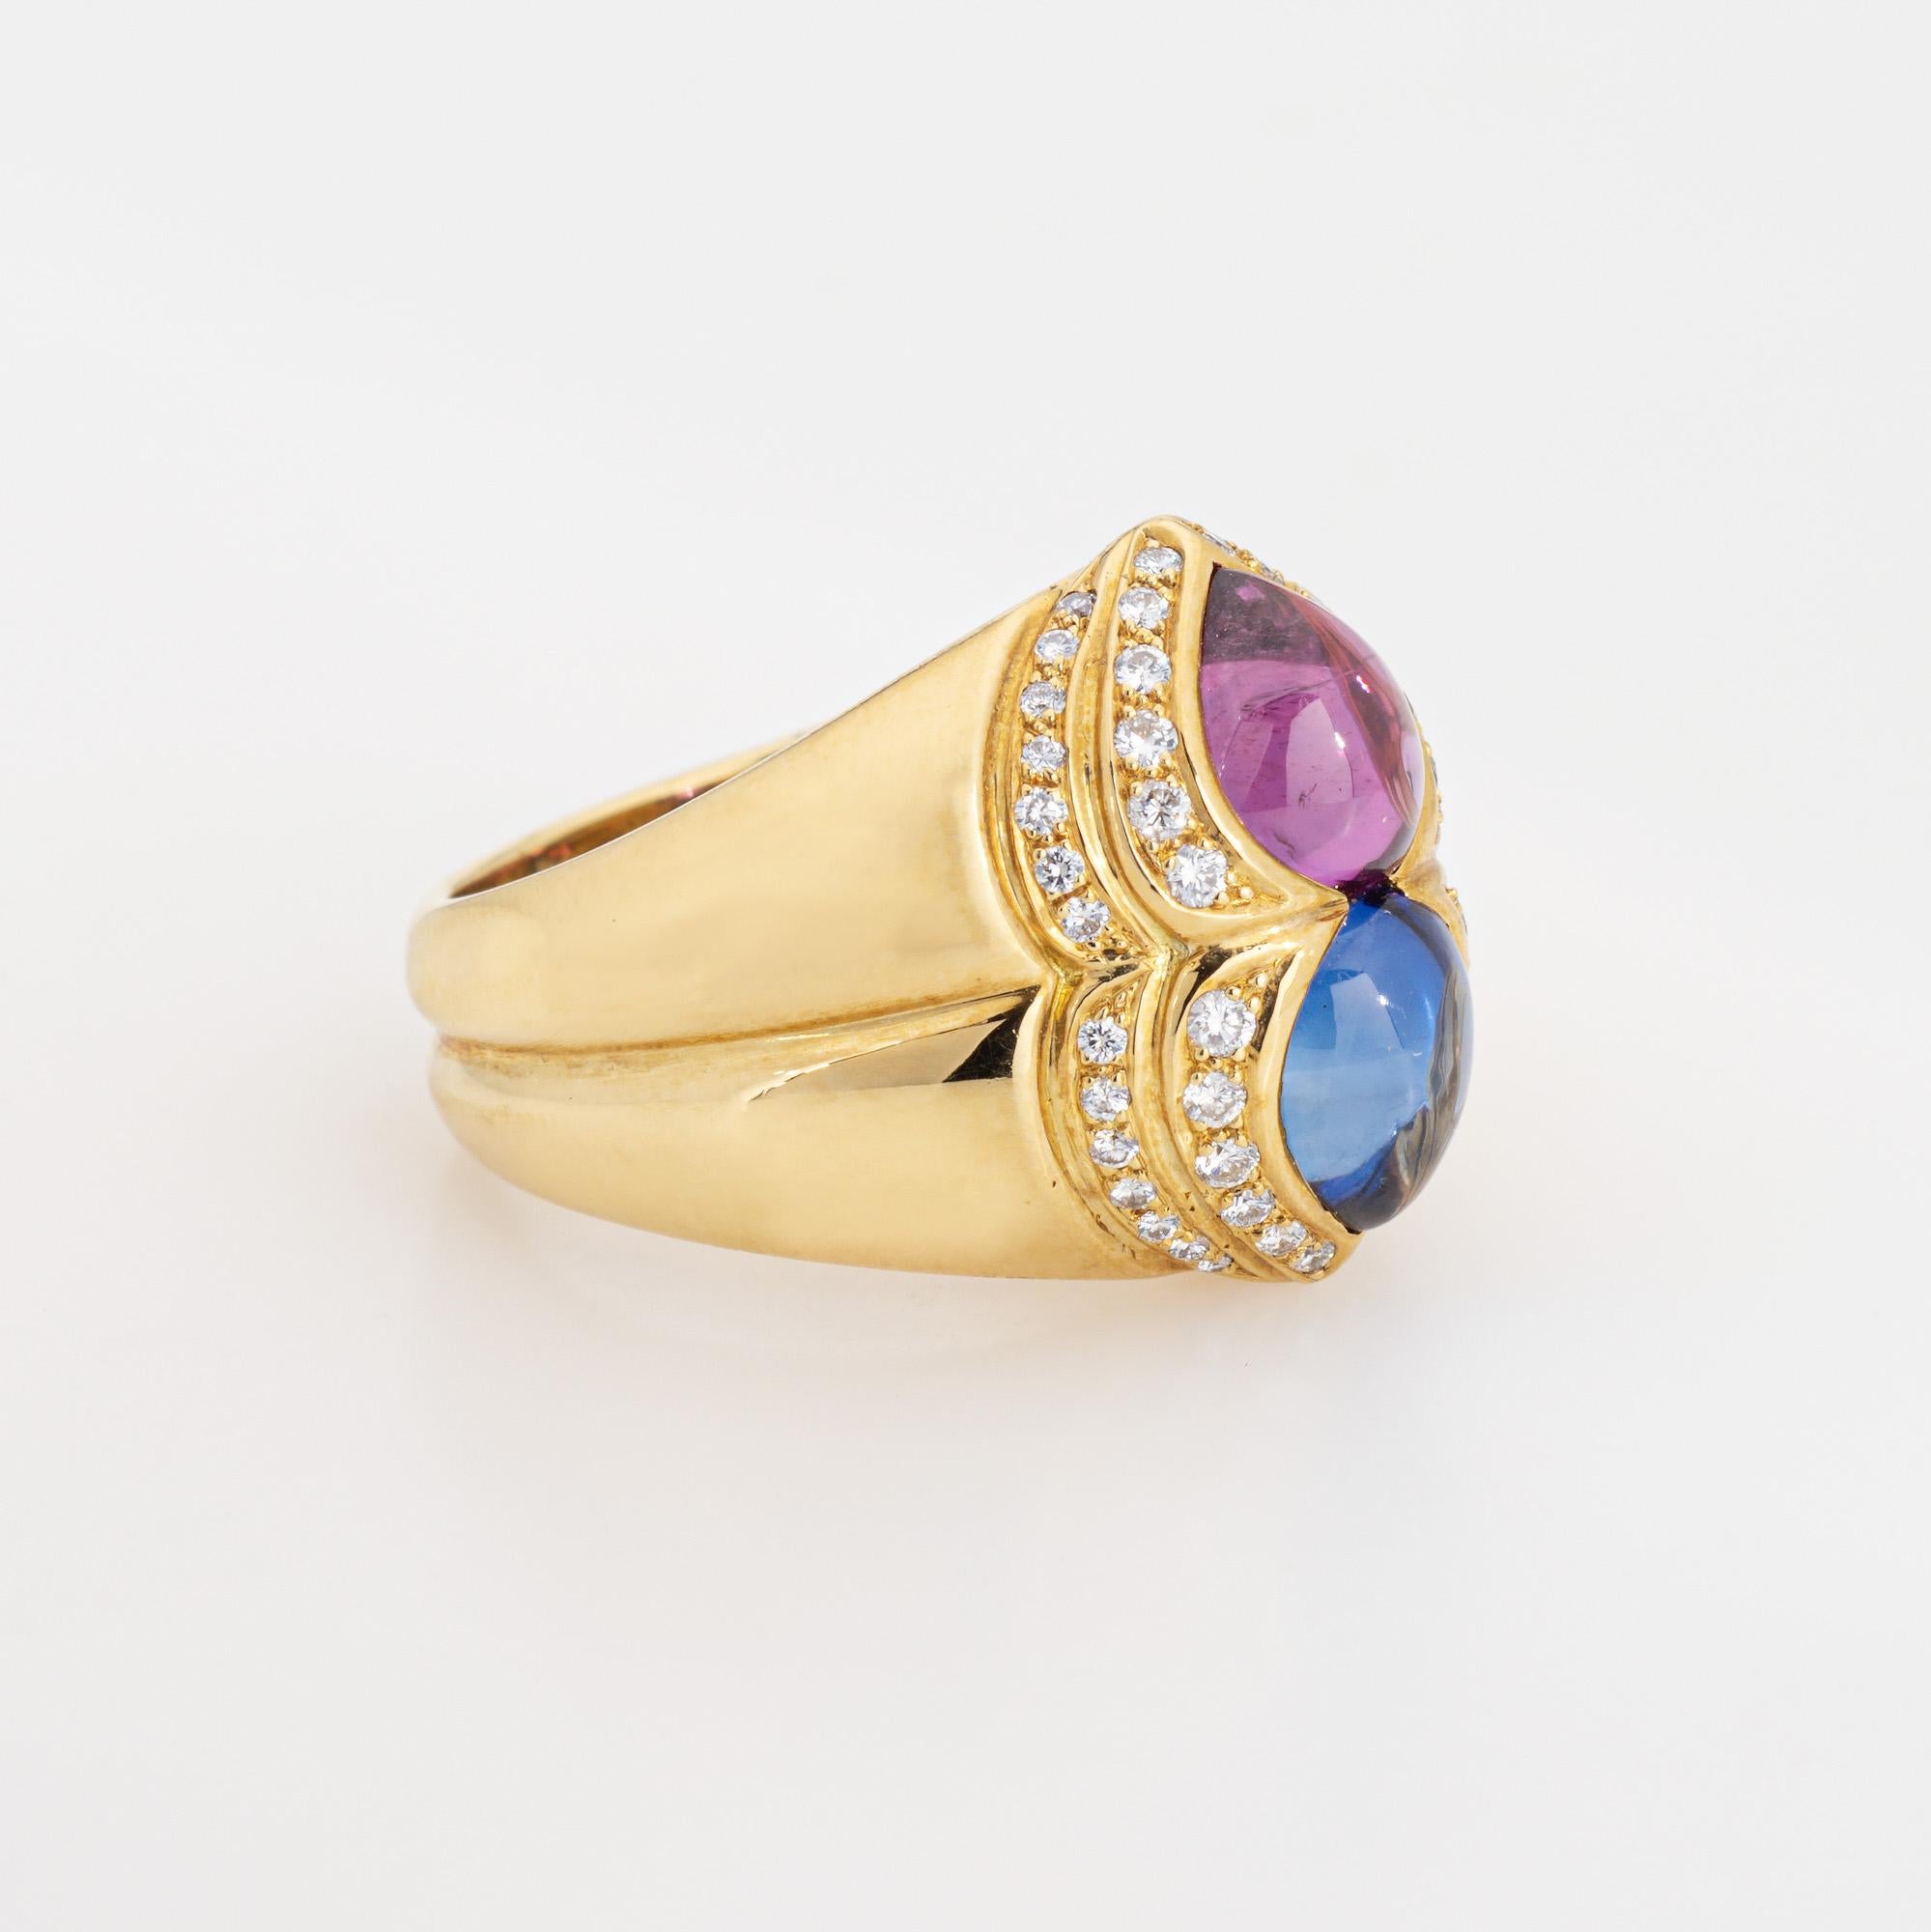 Modern Chopard Pink Blue Sapphire Ring Diamond Estate 18k Yellow Gold Sz 6 Band Signed For Sale